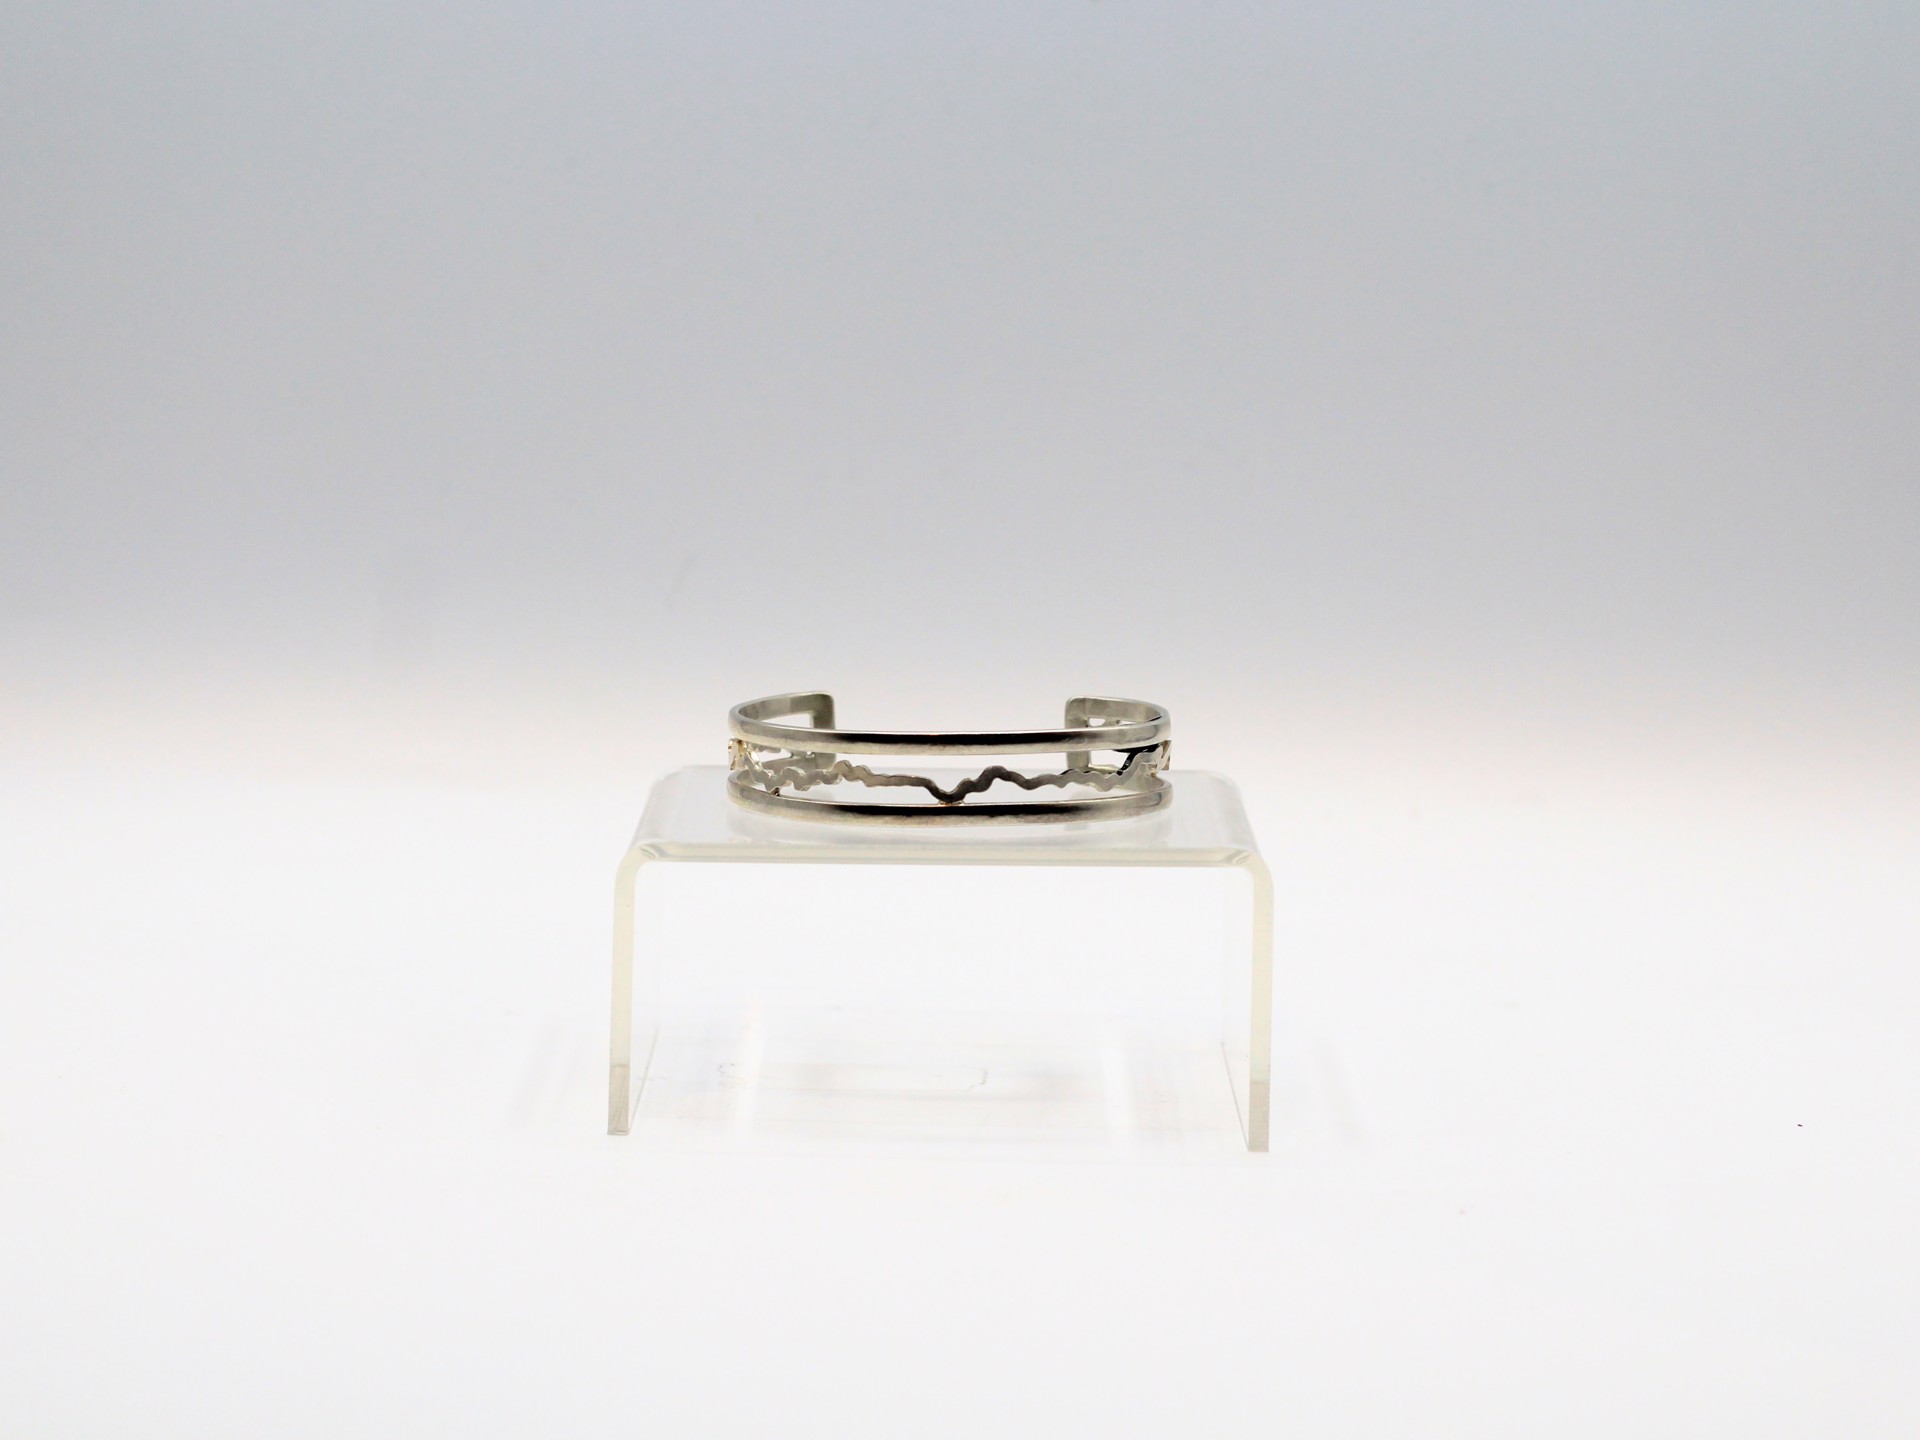 Double Banded Bitterroot Cuff (Sterling Silver) by Emily Dubrawski